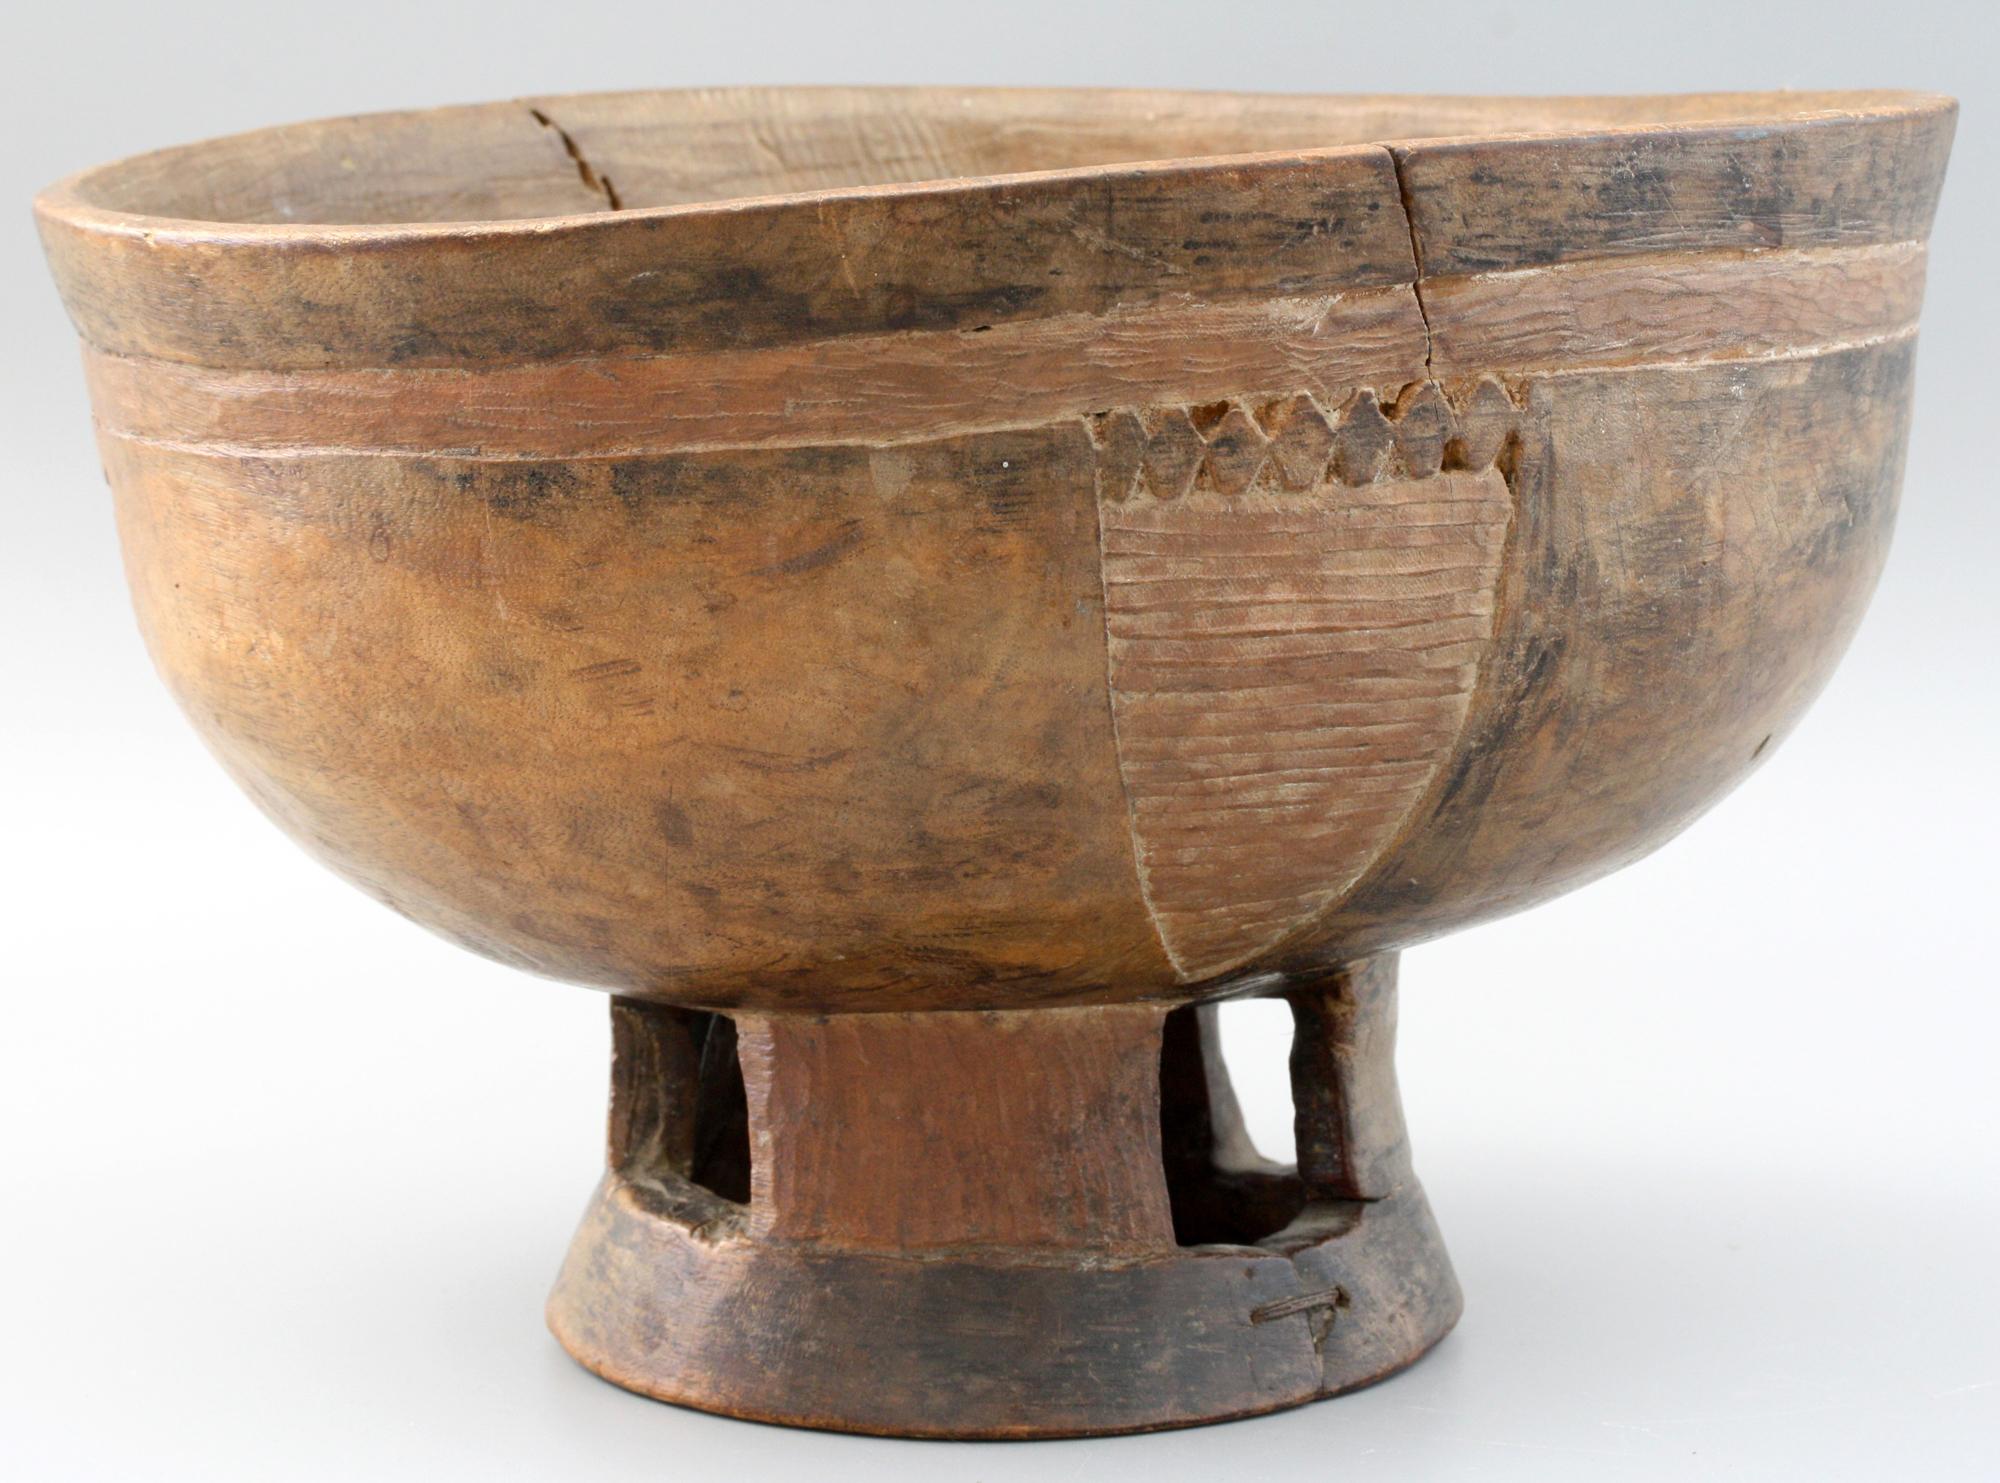 African Tribal Well Carved Wooden Pedestal Bowl or Mortar 6